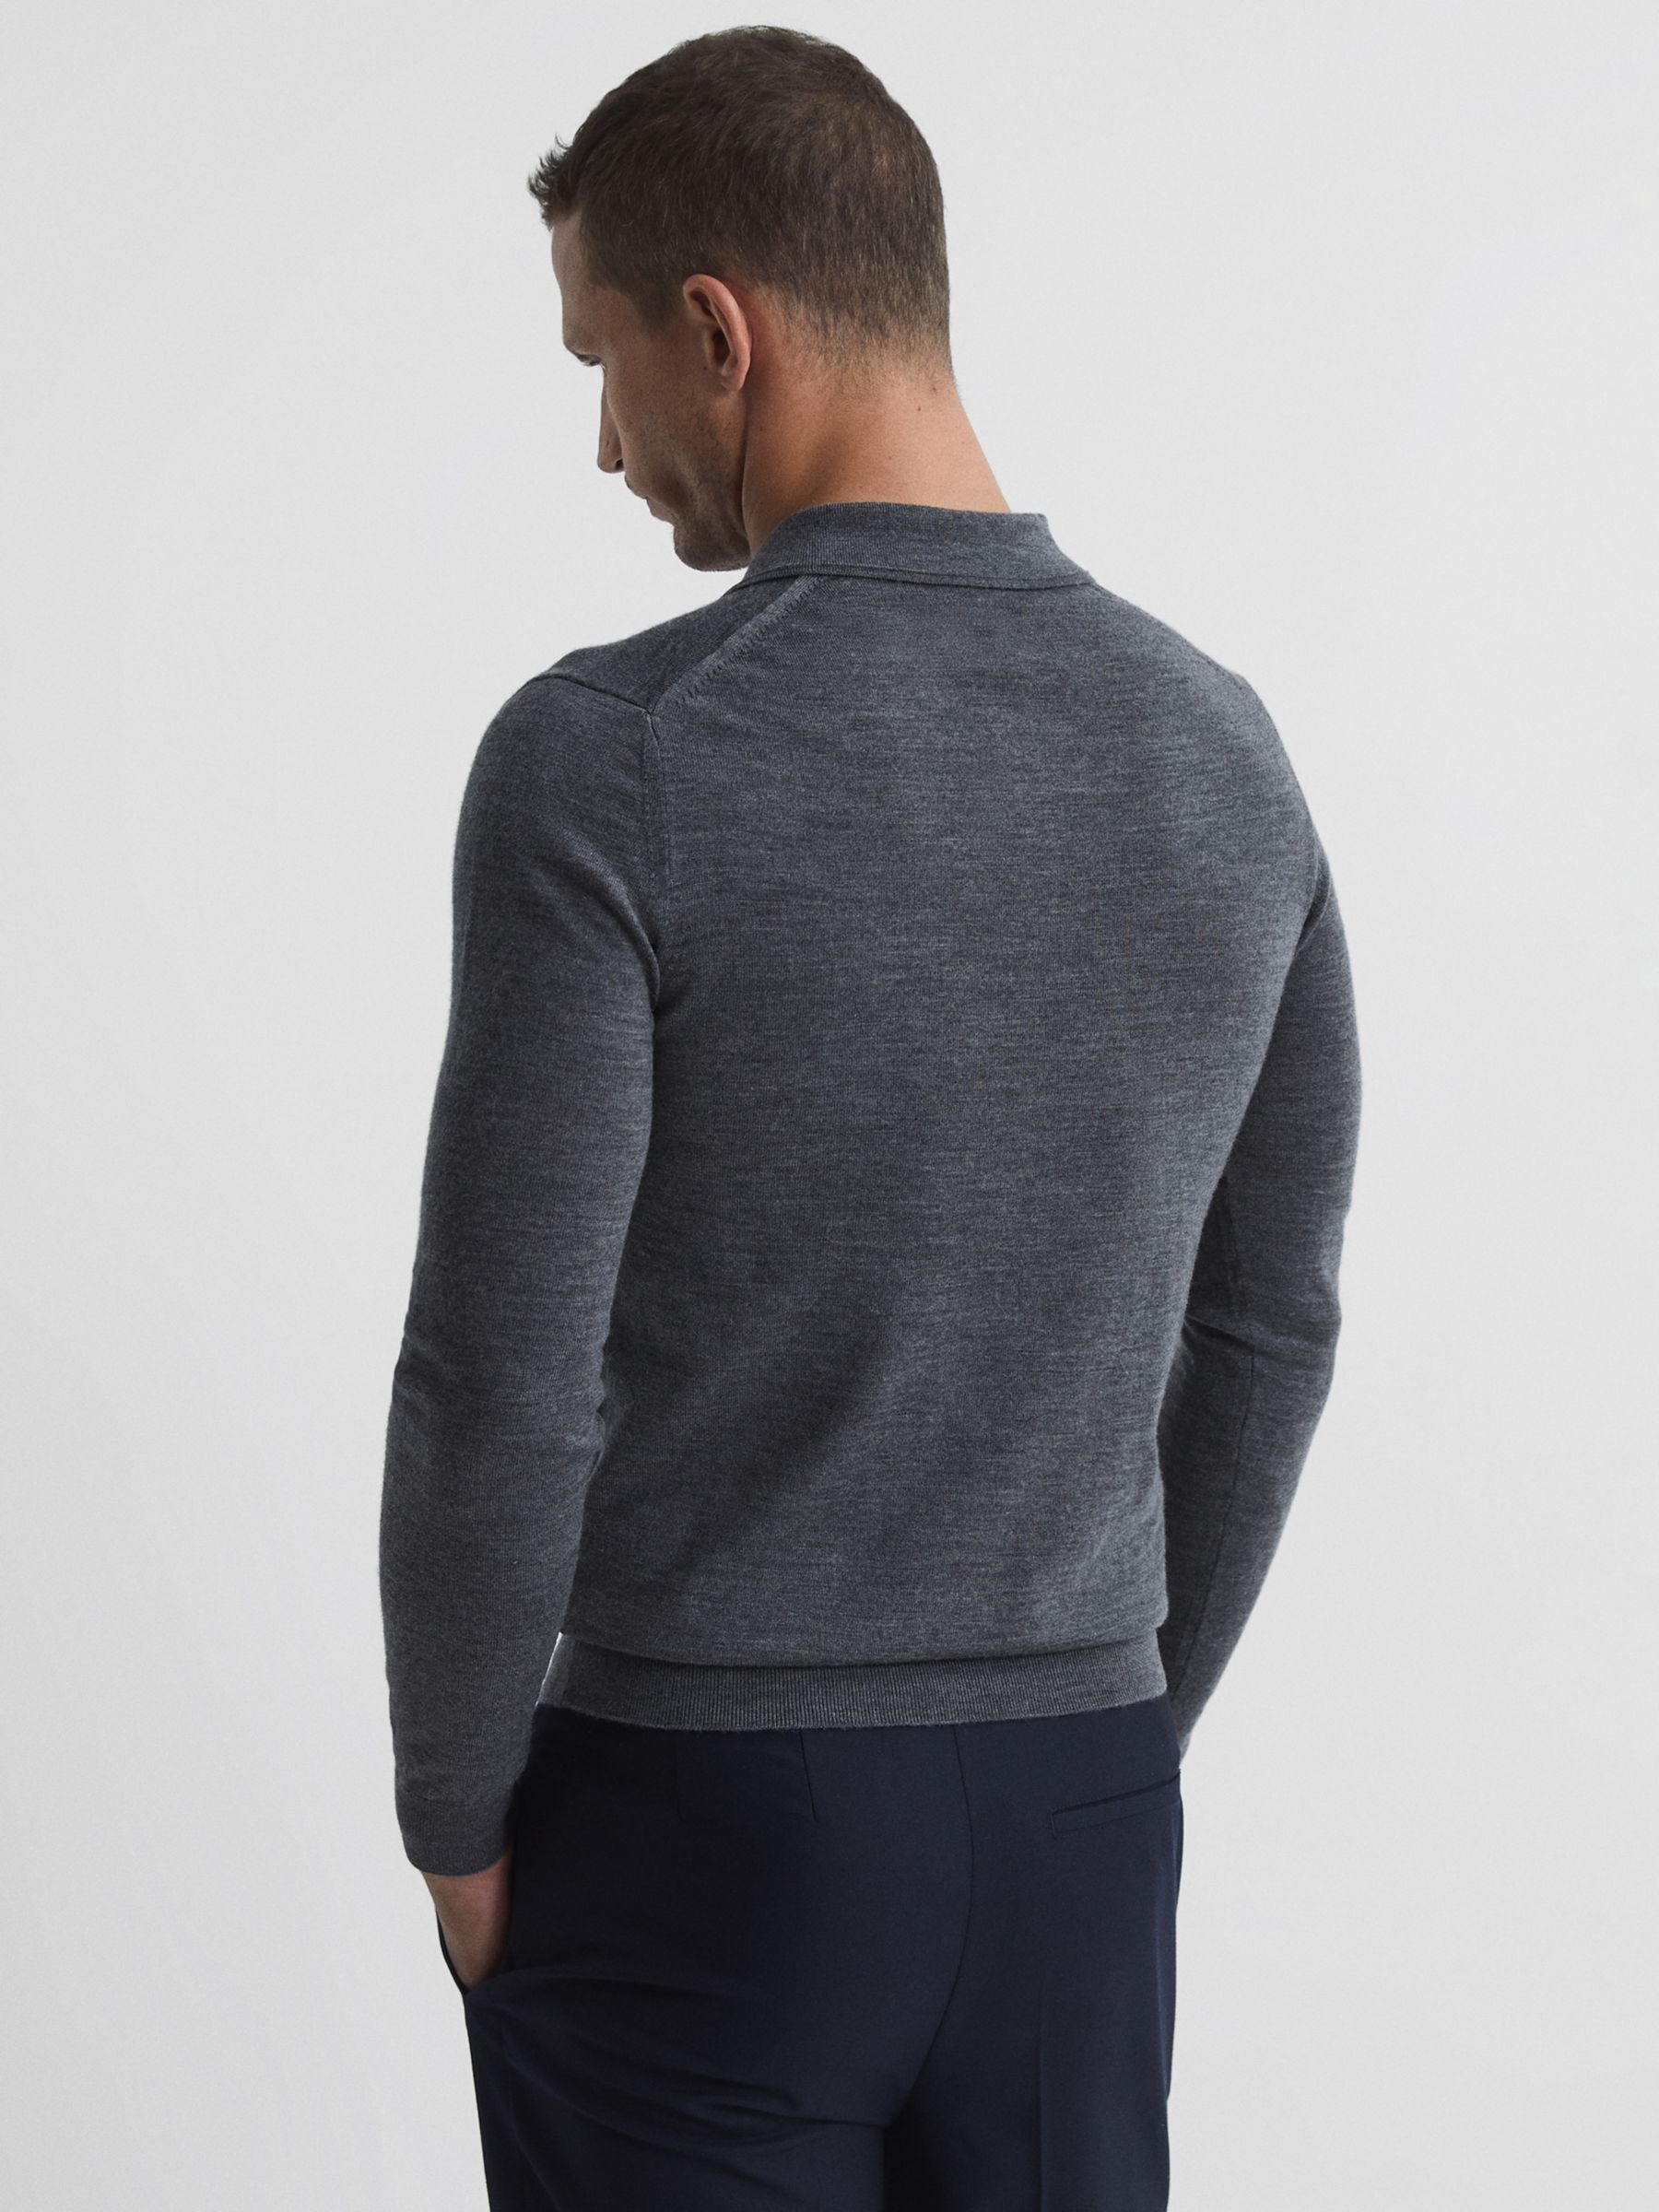 Reiss Trafford Knitted Wool Long Sleeve Polo Top, Mid Grey Melange, XS